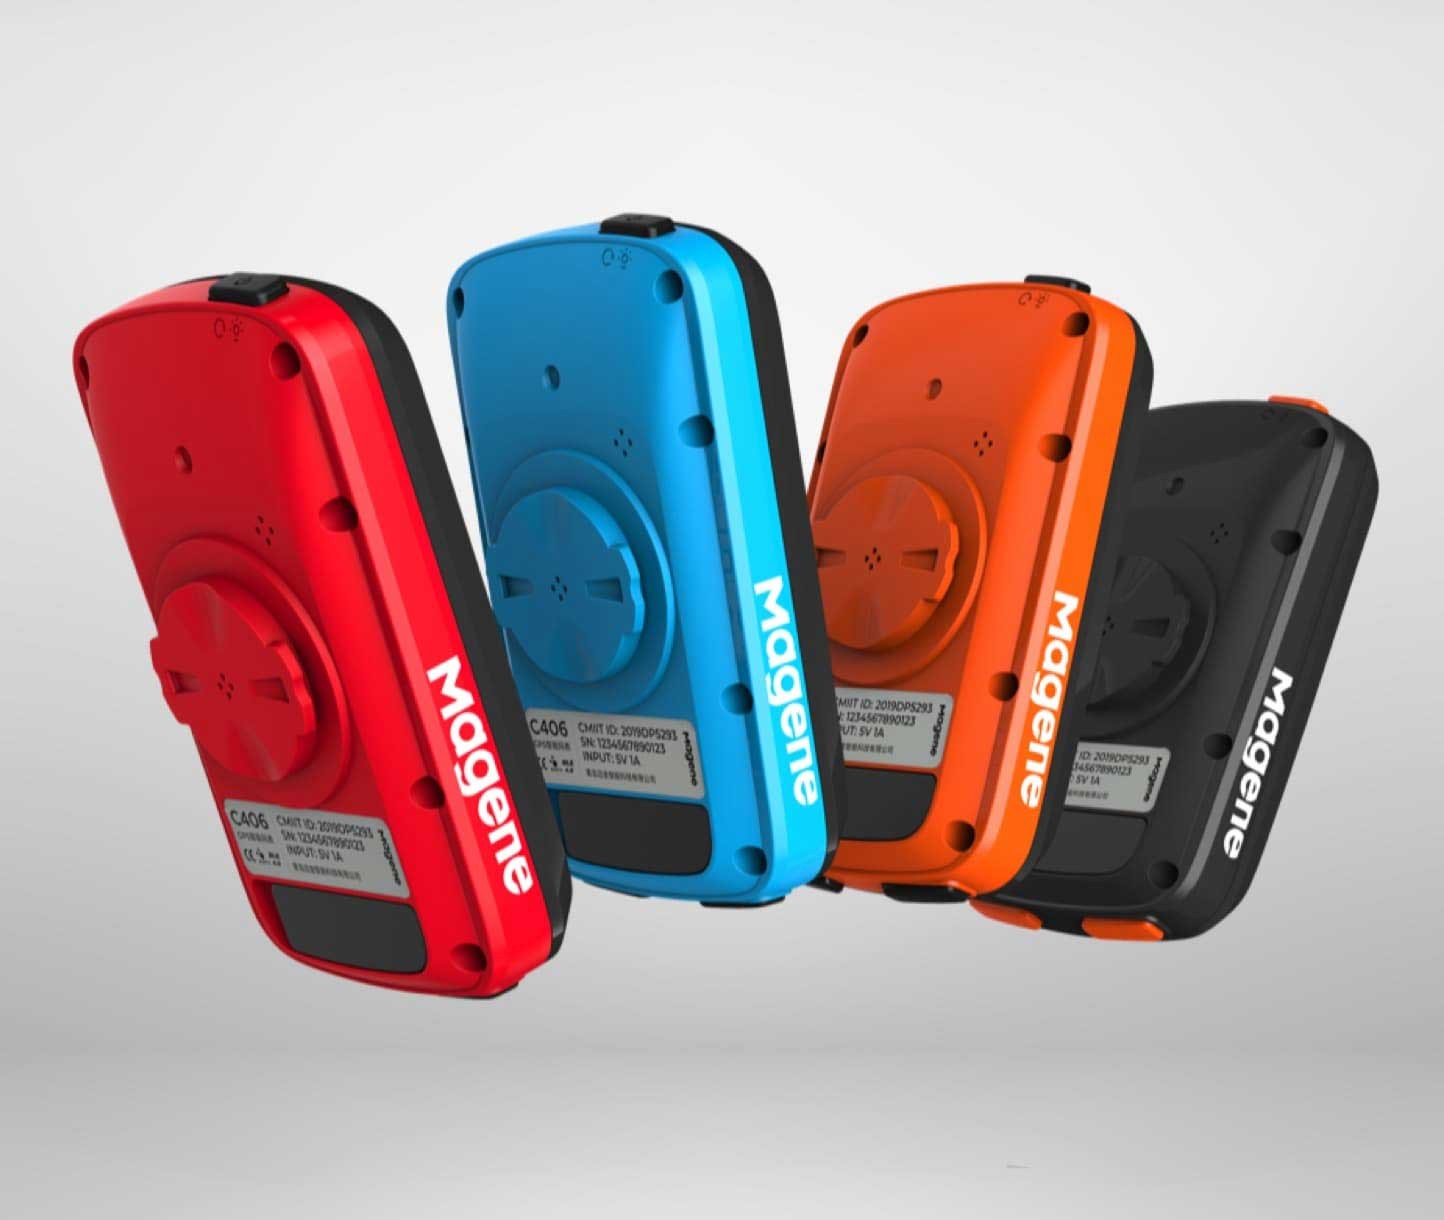  TUSITA Silicone Case Compatible with Wahoo Elemnt Bolt